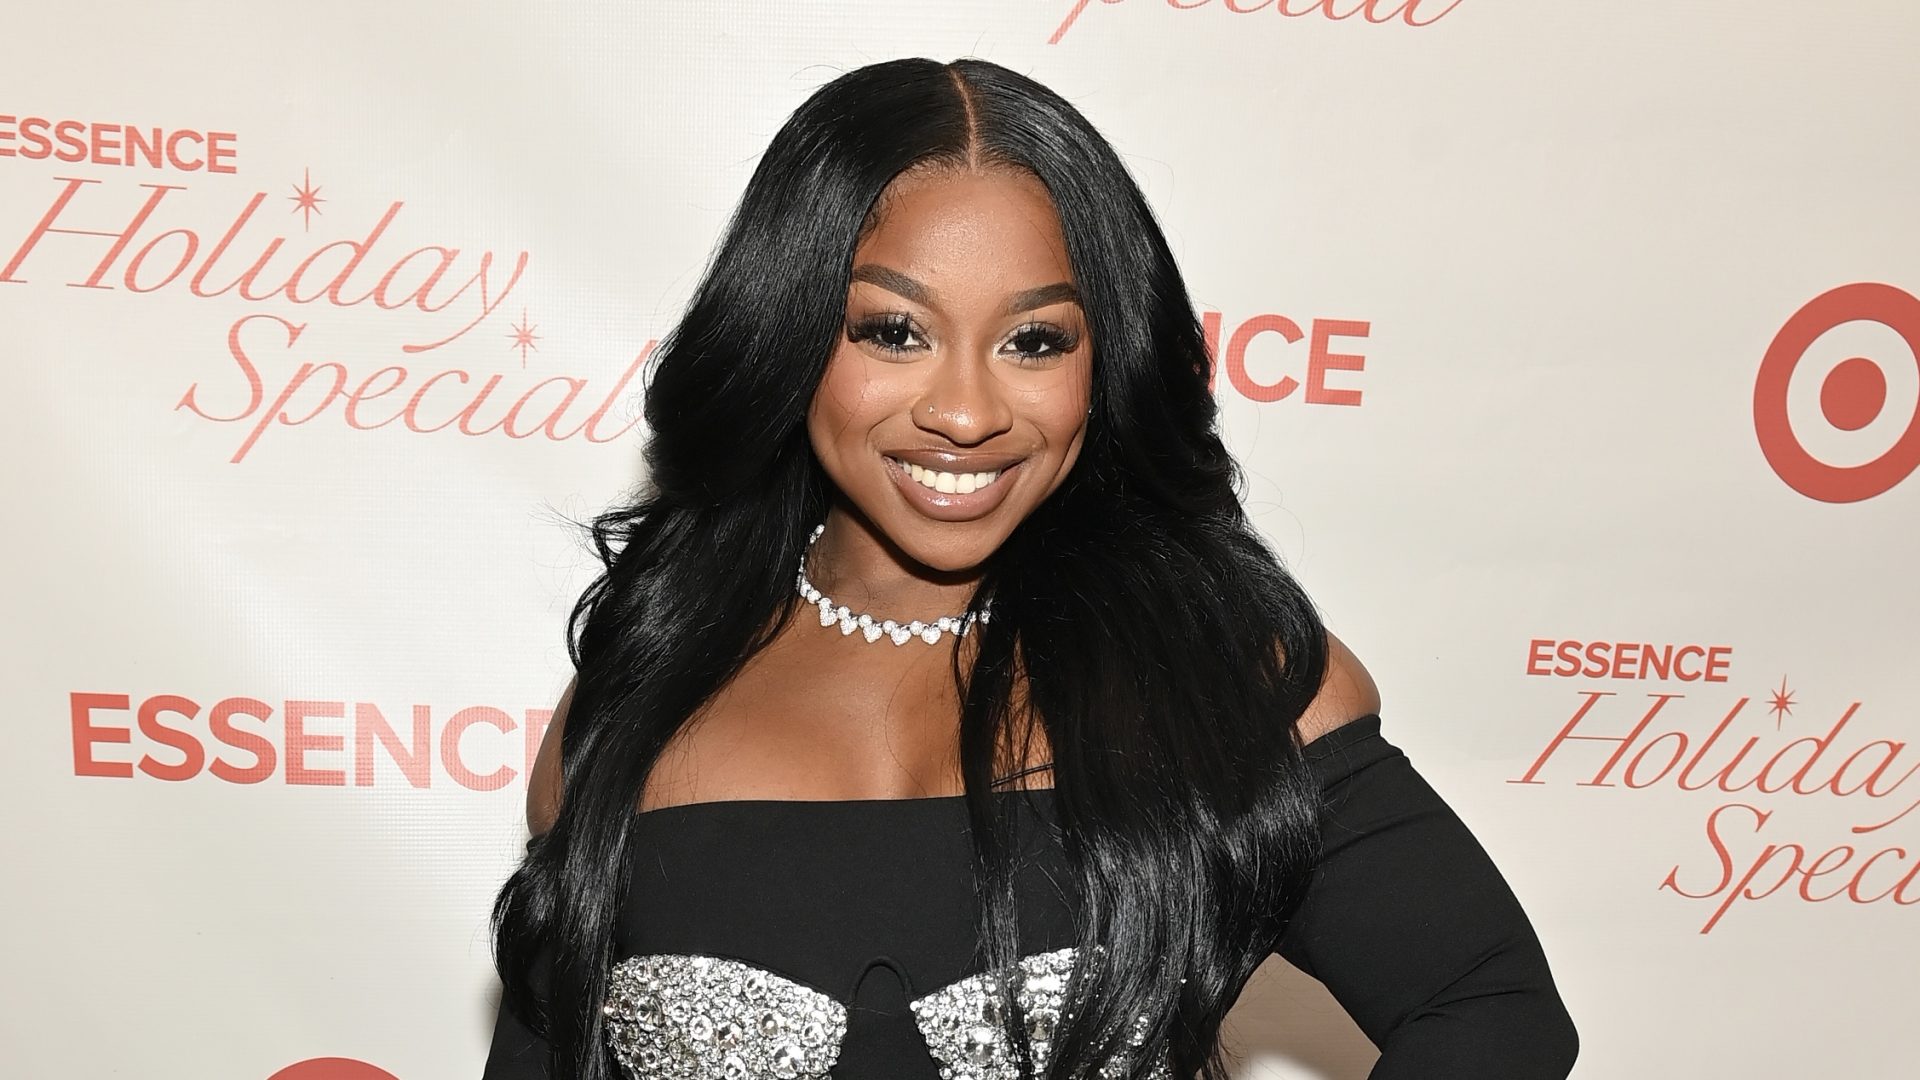 AUSTELL, GEORGIA - NOVEMBER 08: Reginae Carter seen backstage during the 2023 ESSENCE Holiday Special at Riverside EpiCenter on November 08, 2023 in Austell, Georgia.